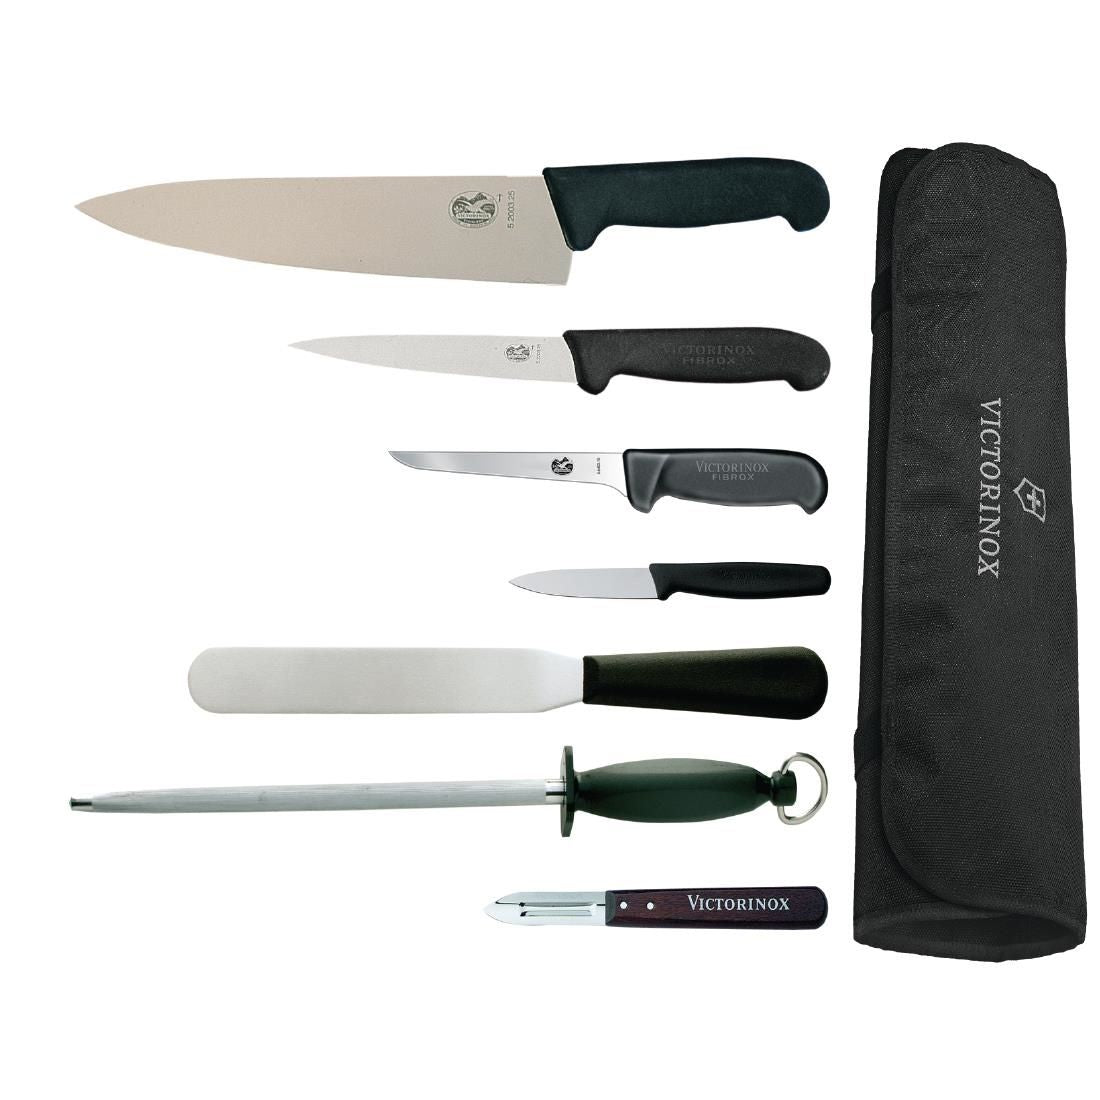 F202 Victorinox 25cm Chefs Knife with Hygiplas and Vogue Knife Set